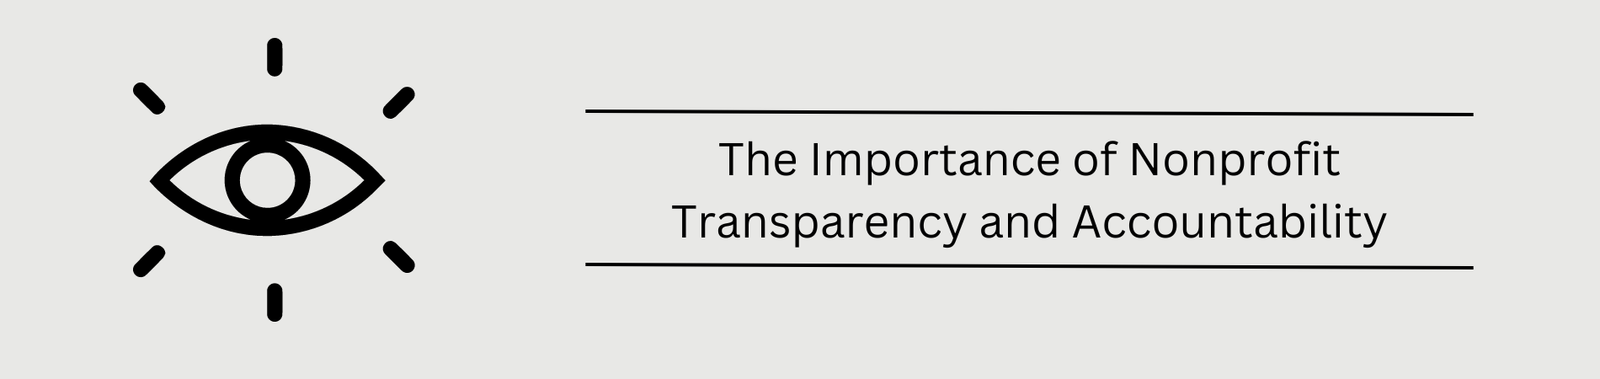 The Importance of Nonprofit Transparency and Accountability